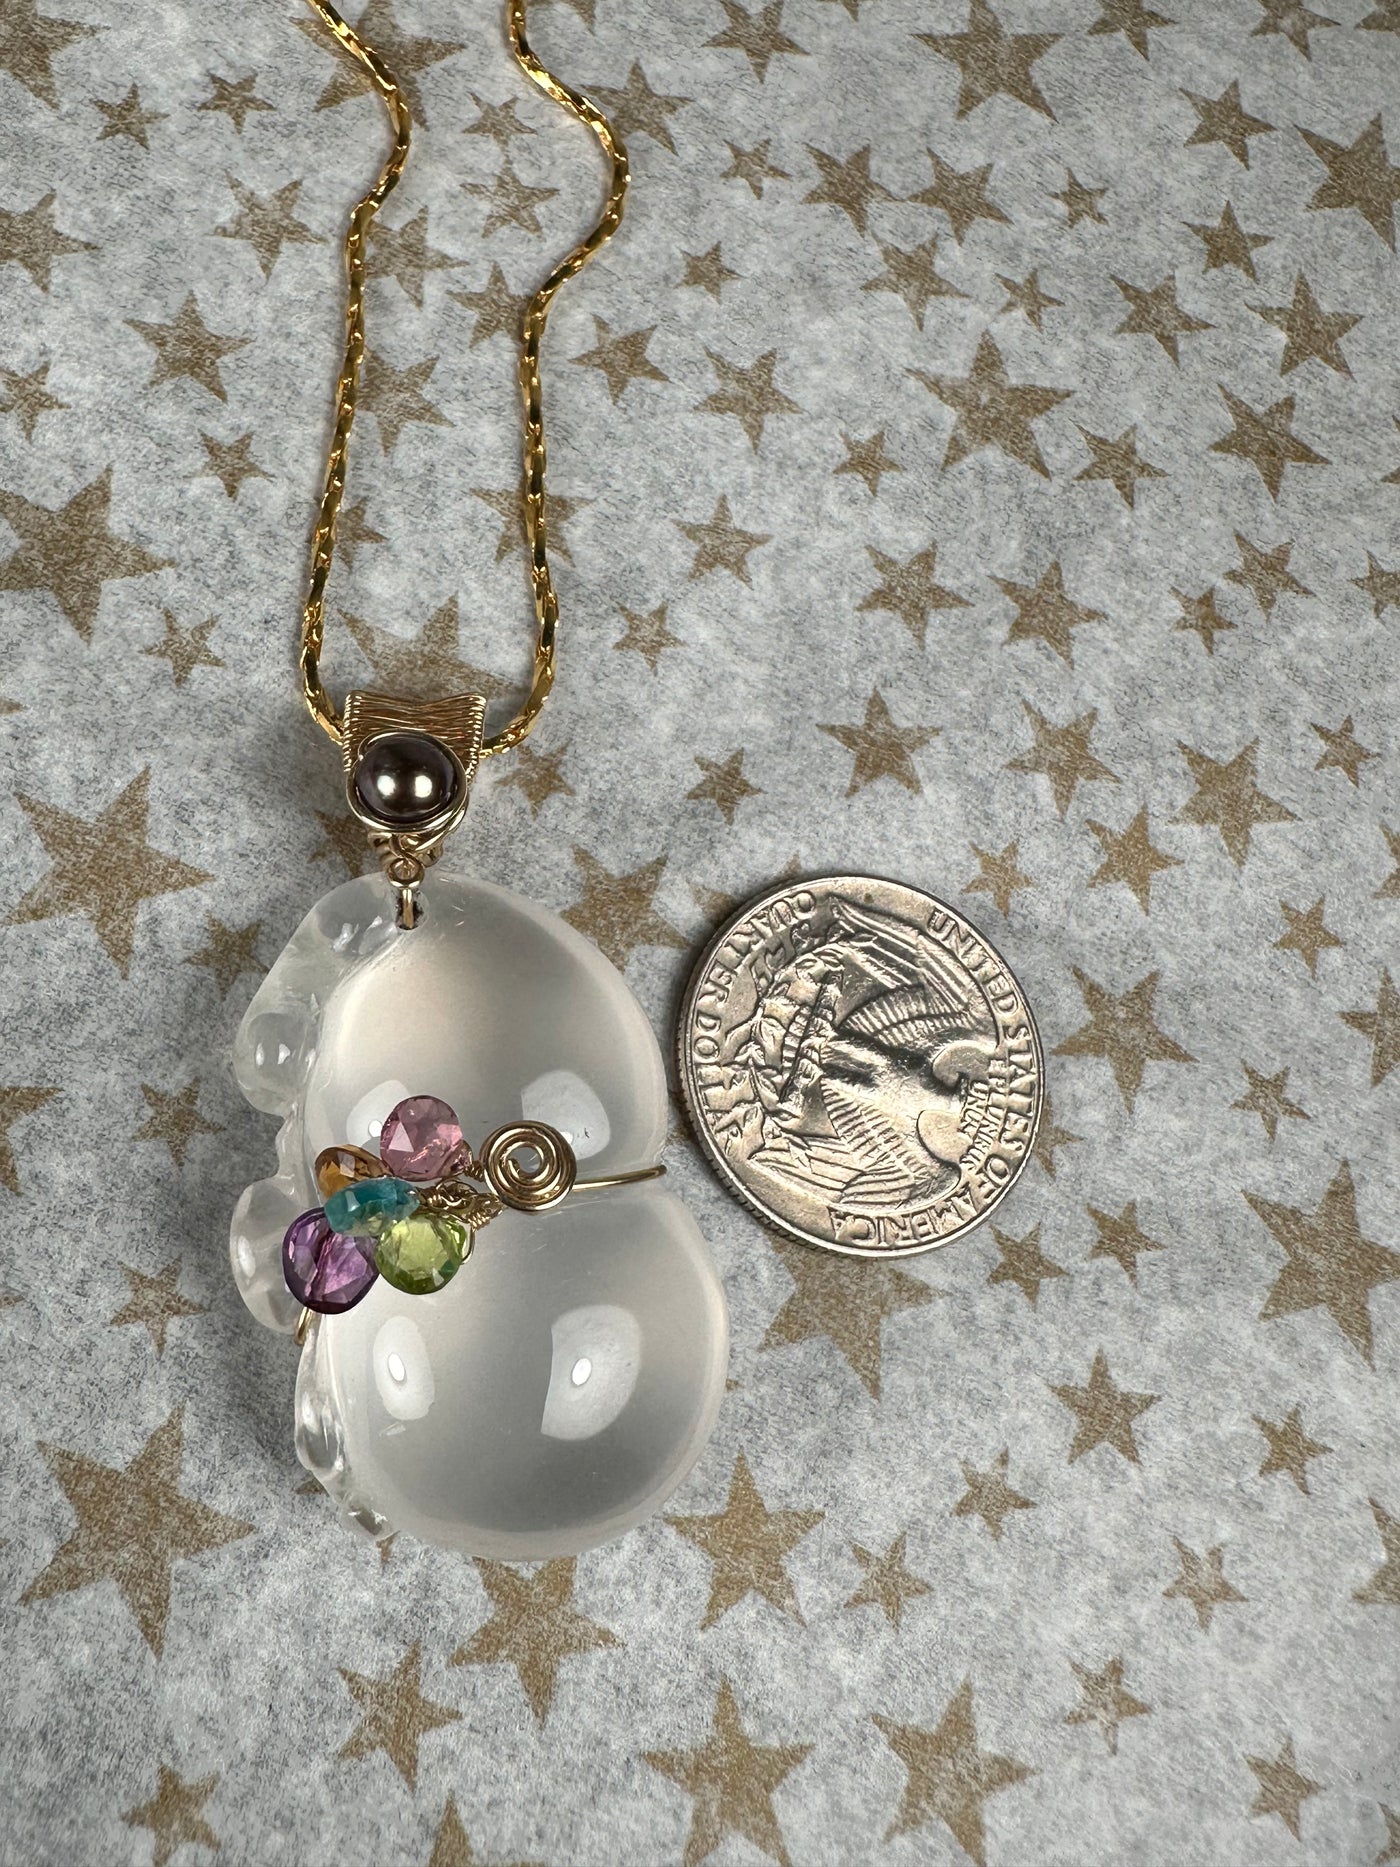 Milky Quartz and Multiple Gems Pendant Created by a Local Artist